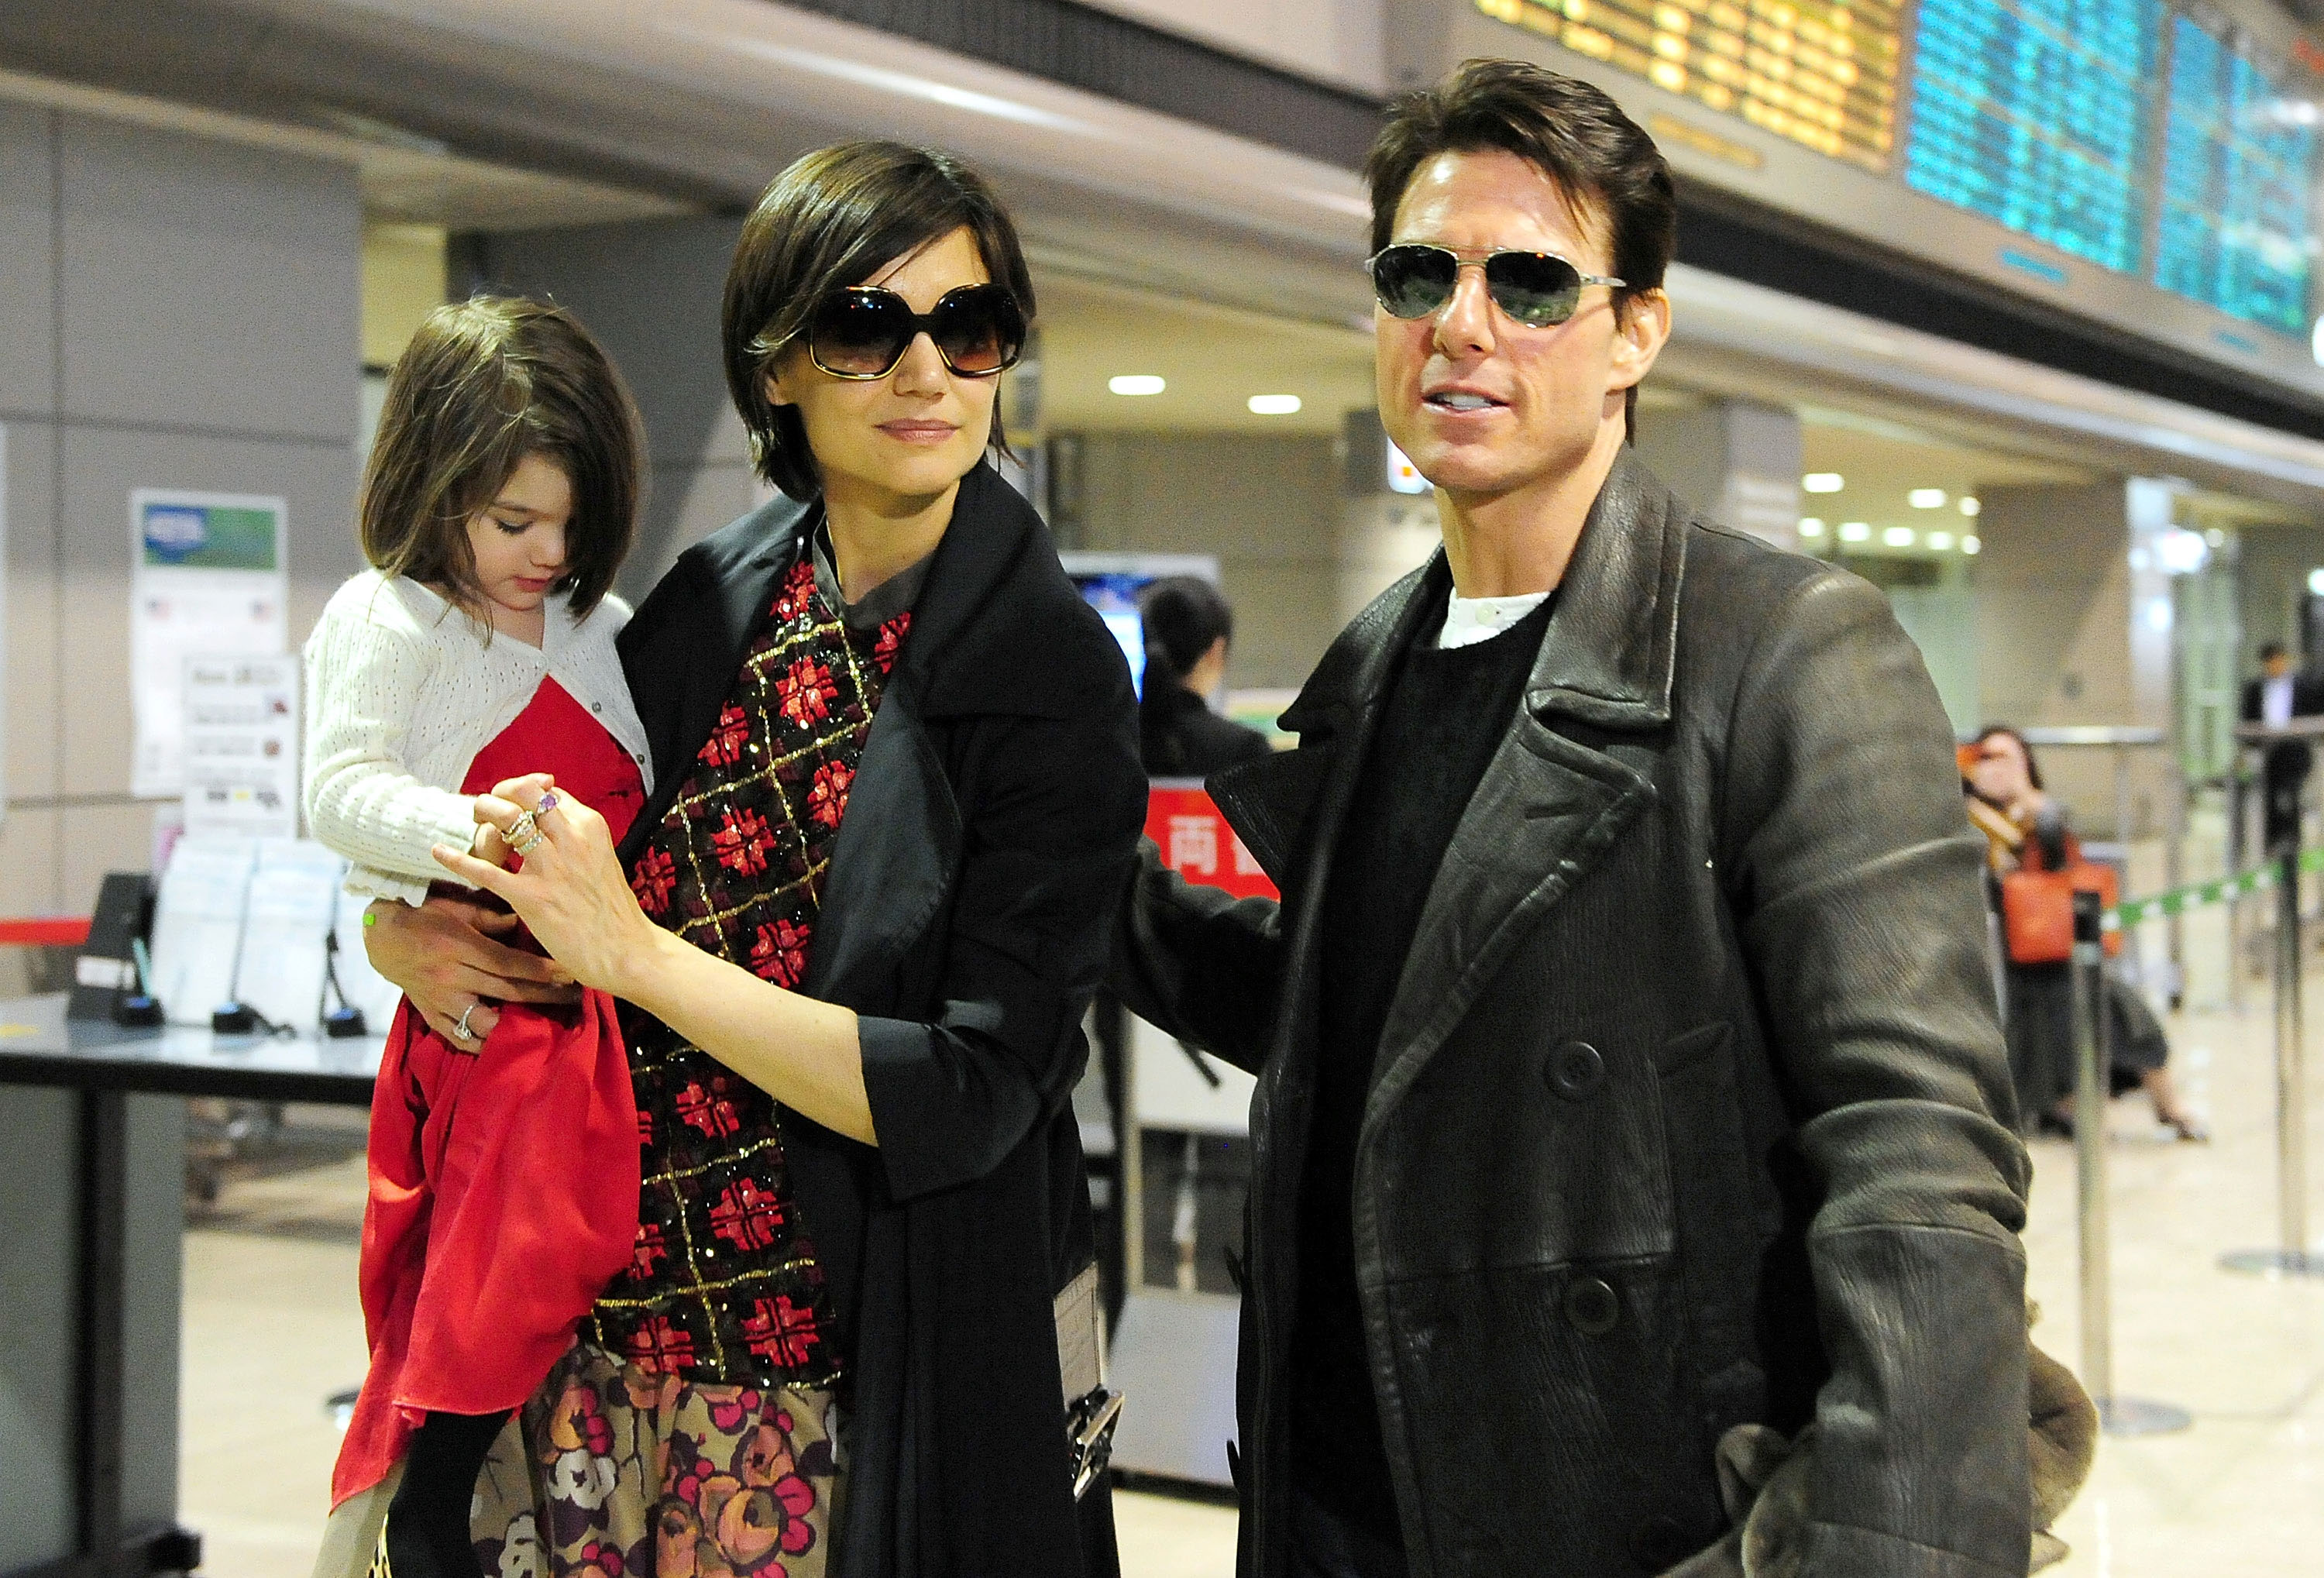 Suri Cruise, Tom Cruise, and Katie Holmes at Narita International Airport on March 8, 2009 in Narita, Chiba, Japan. | Source: Getty Images